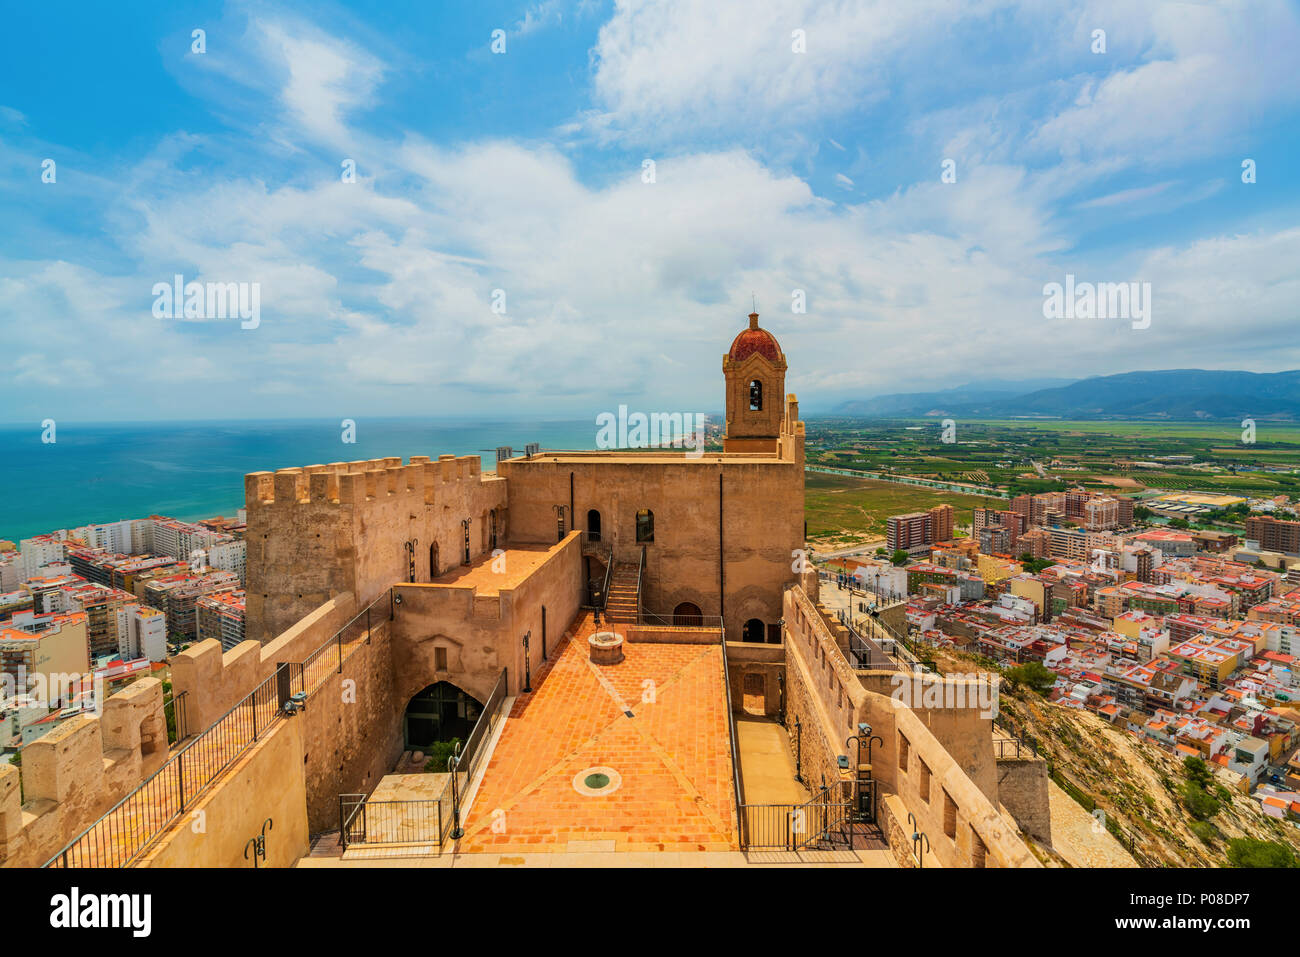 View of the castle in the city of Cullera on a cloudy day. District of Valencia. Spain Stock Photo